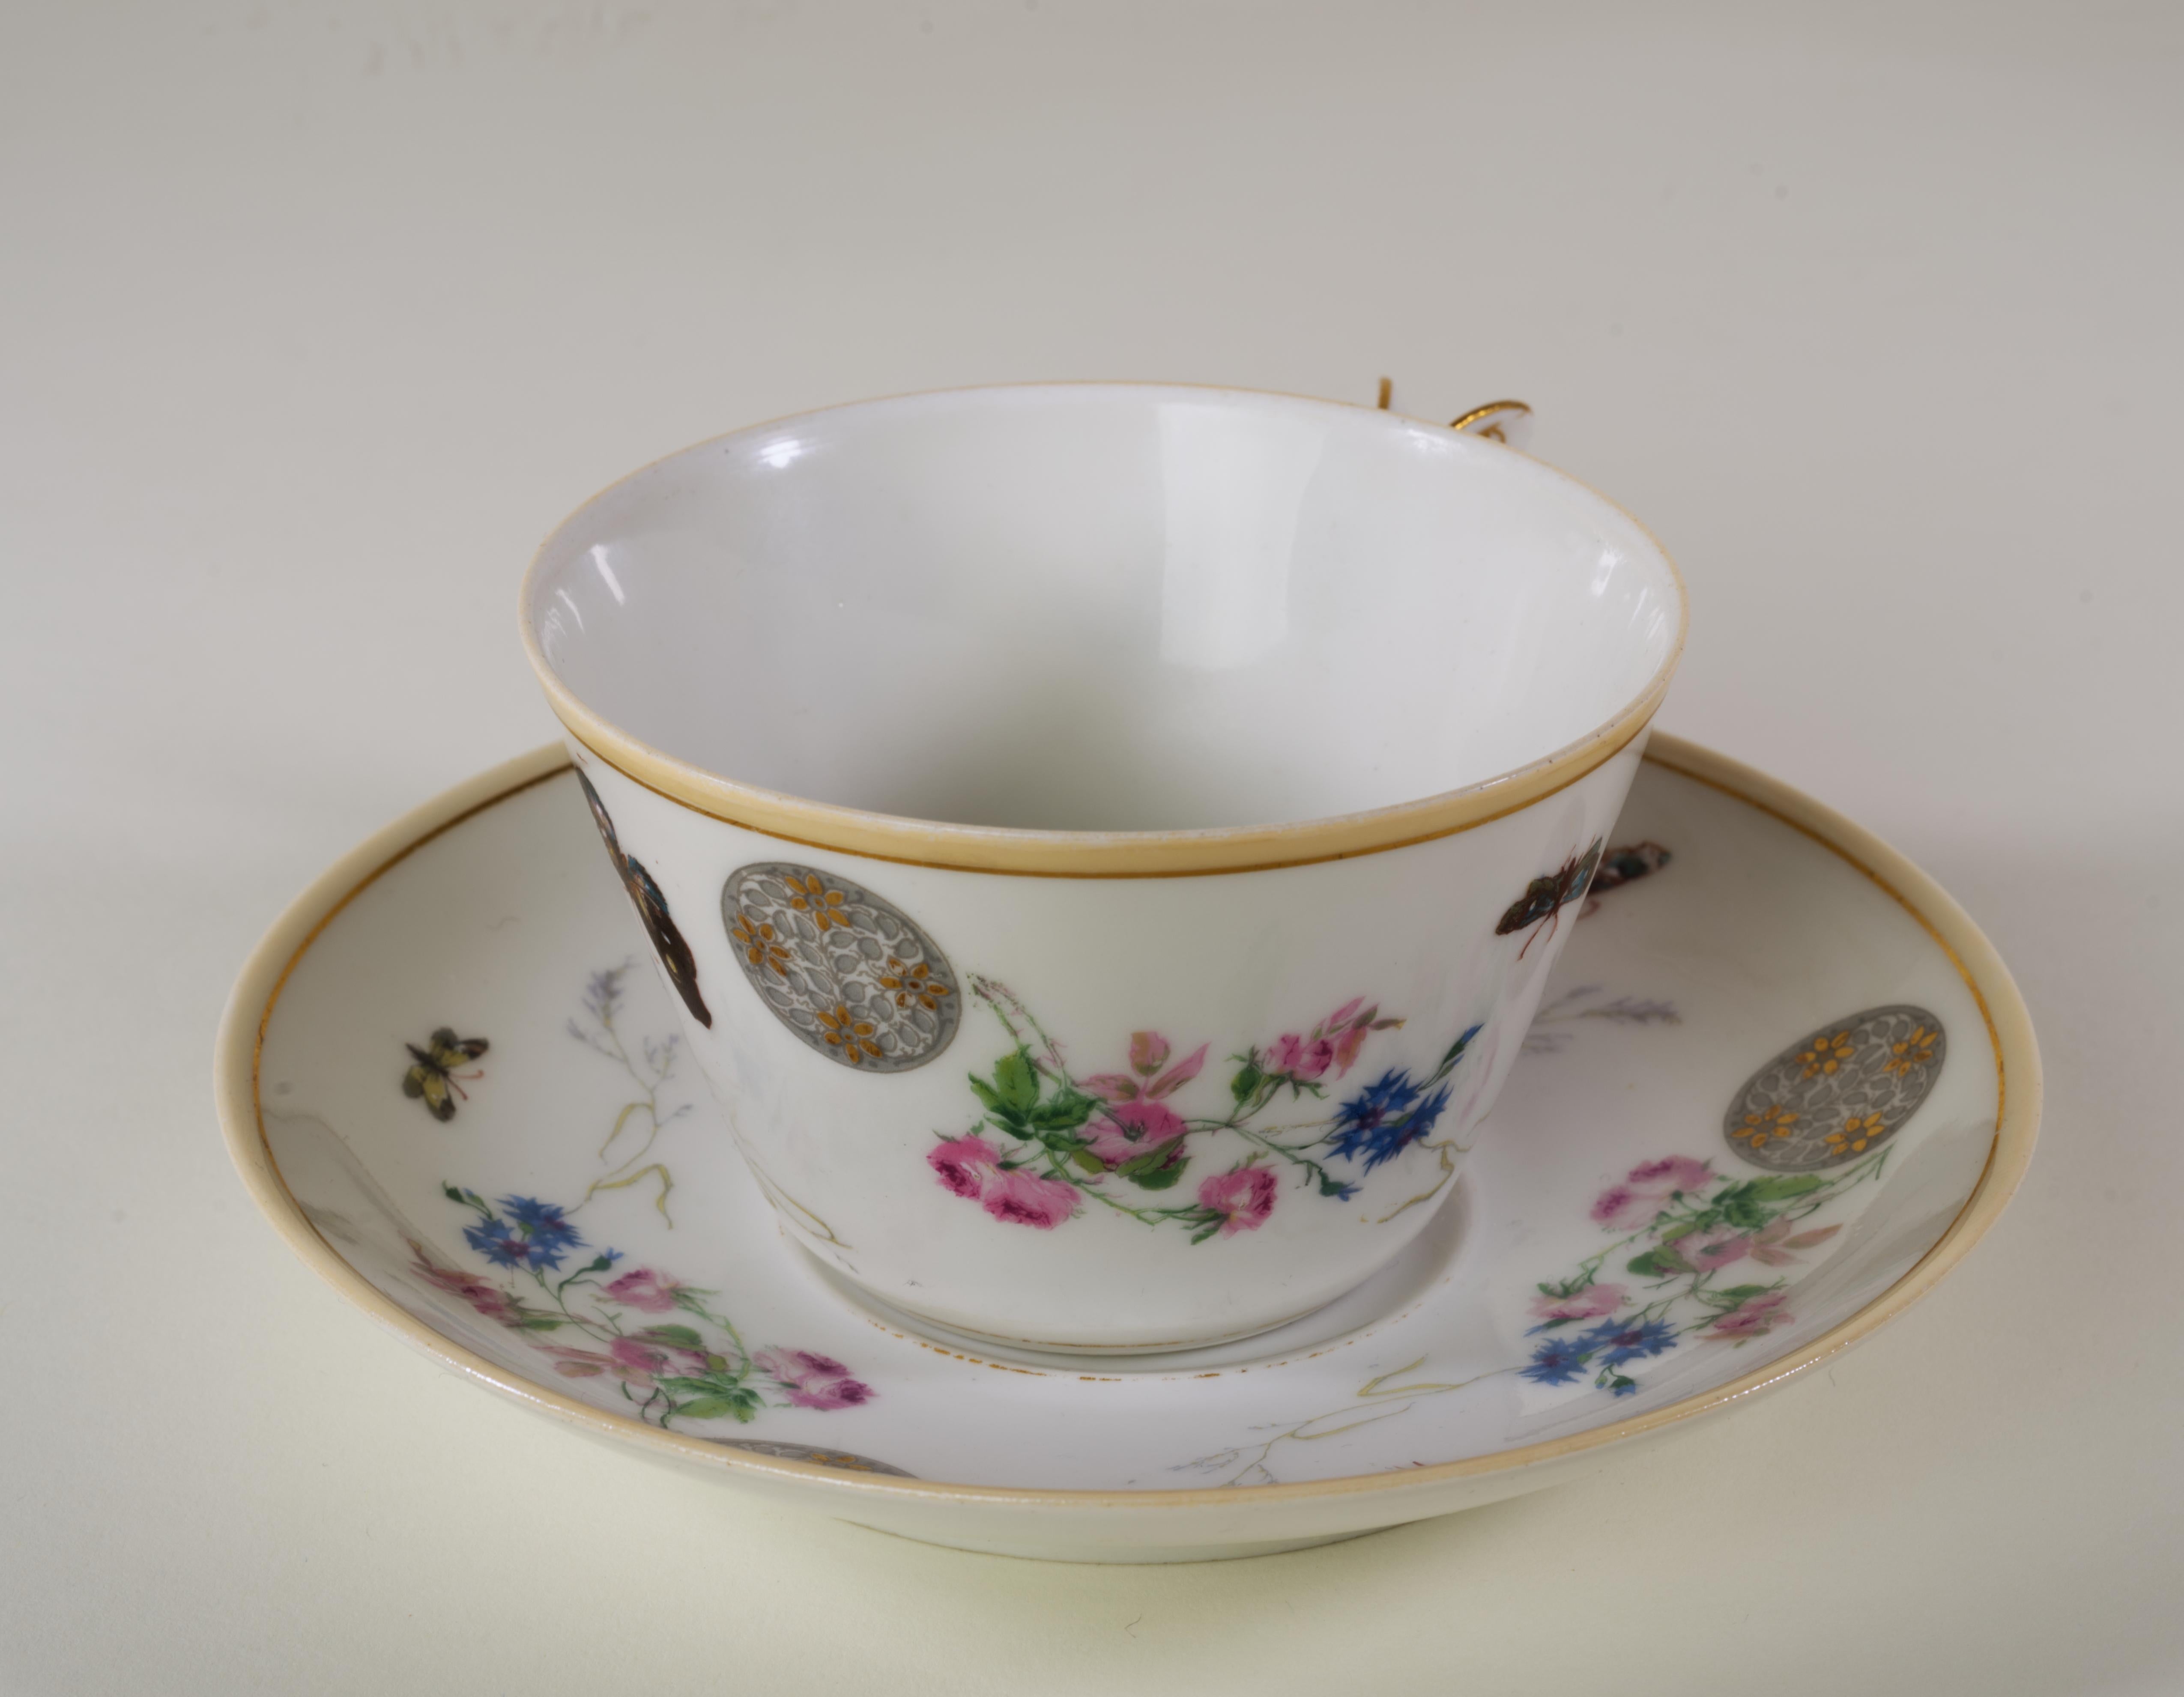 19th Century Haviland Limoges Butterfly Handled Cup and saucer set, 1879-1889, Aesthetic  For Sale